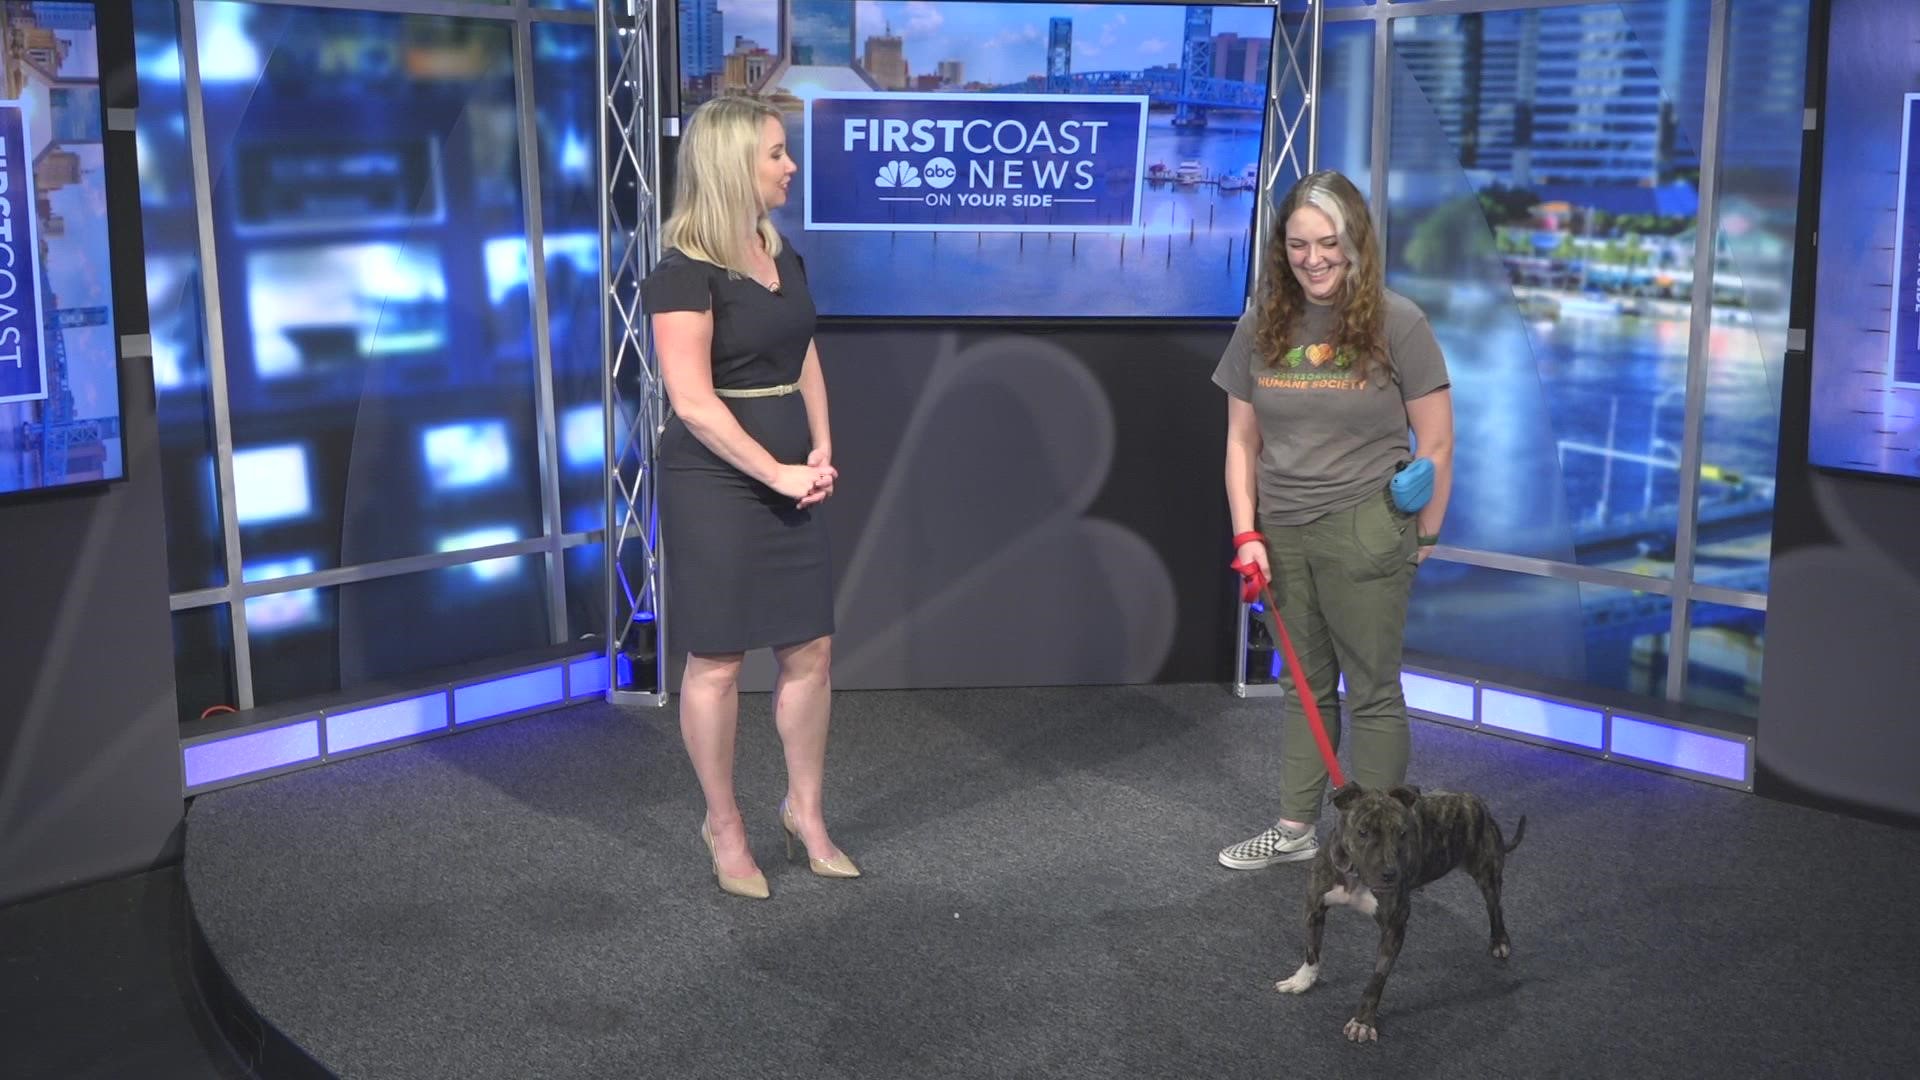 Meet Pawzilla from the Jacksonville Humane Society! He is full of energy and would prefer to be the star of the show!